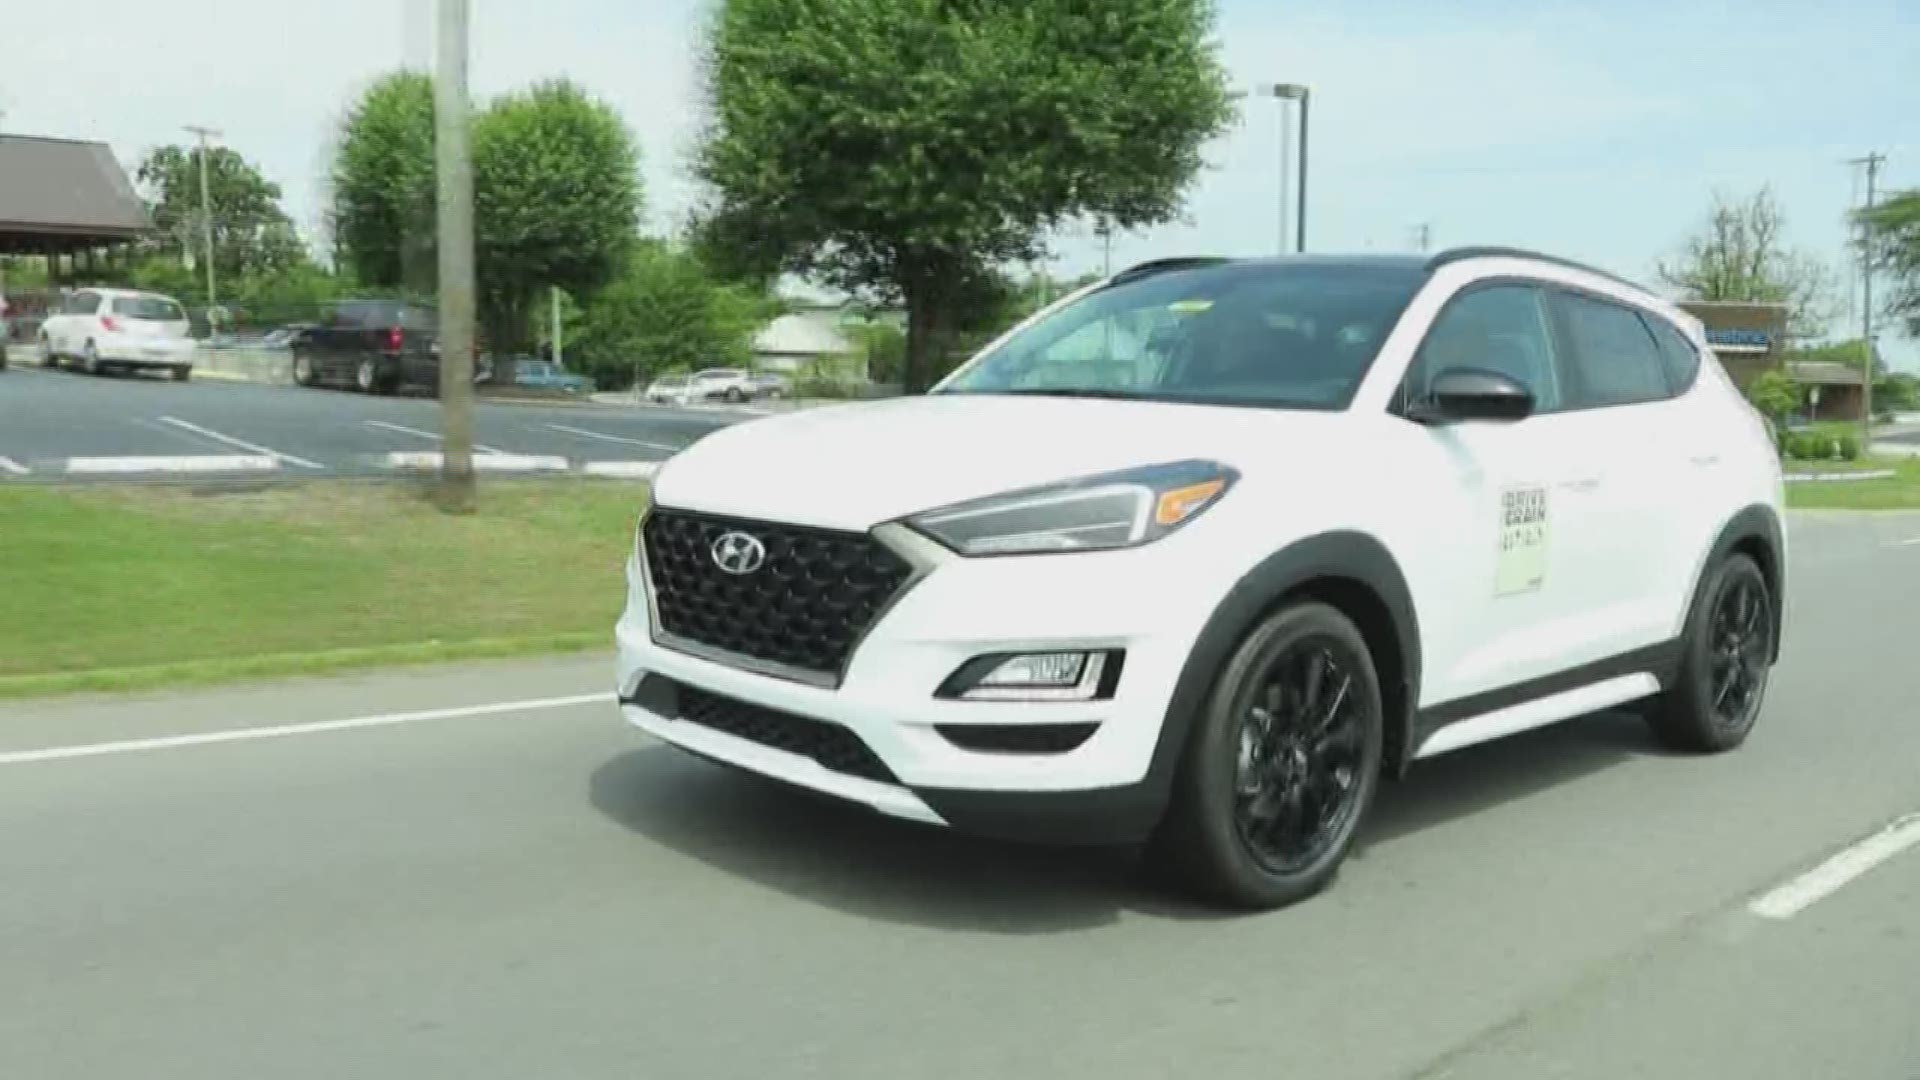 Crain Hyundai of North Little Rock is located at 5660 Warden Rd. in North Little Rock.